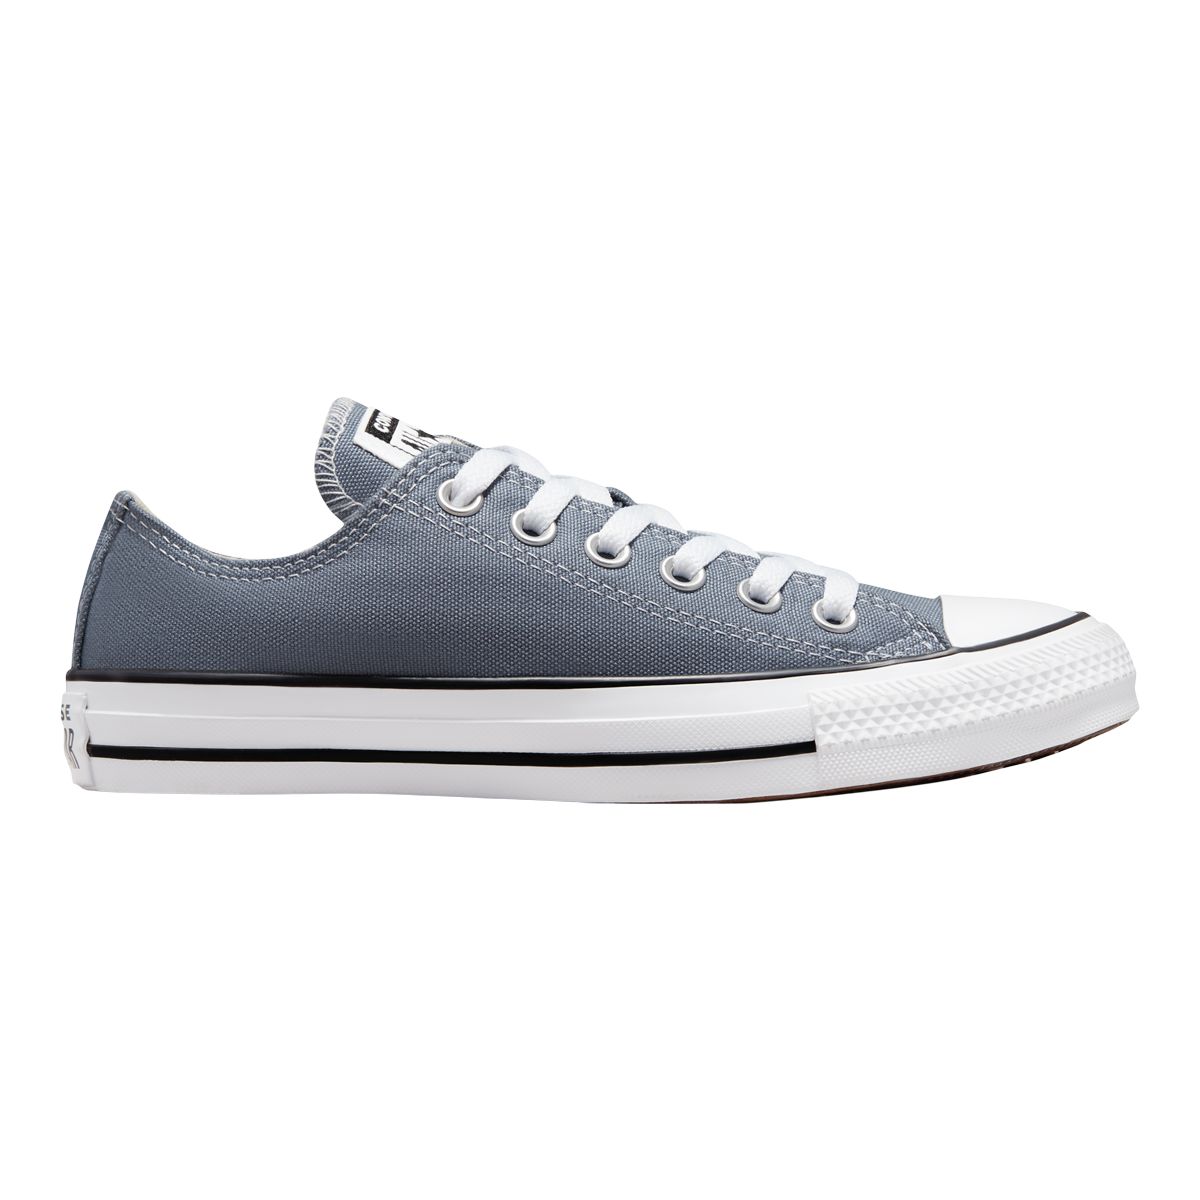 Image of Converse Women's Chuck Taylor Ox Shoes